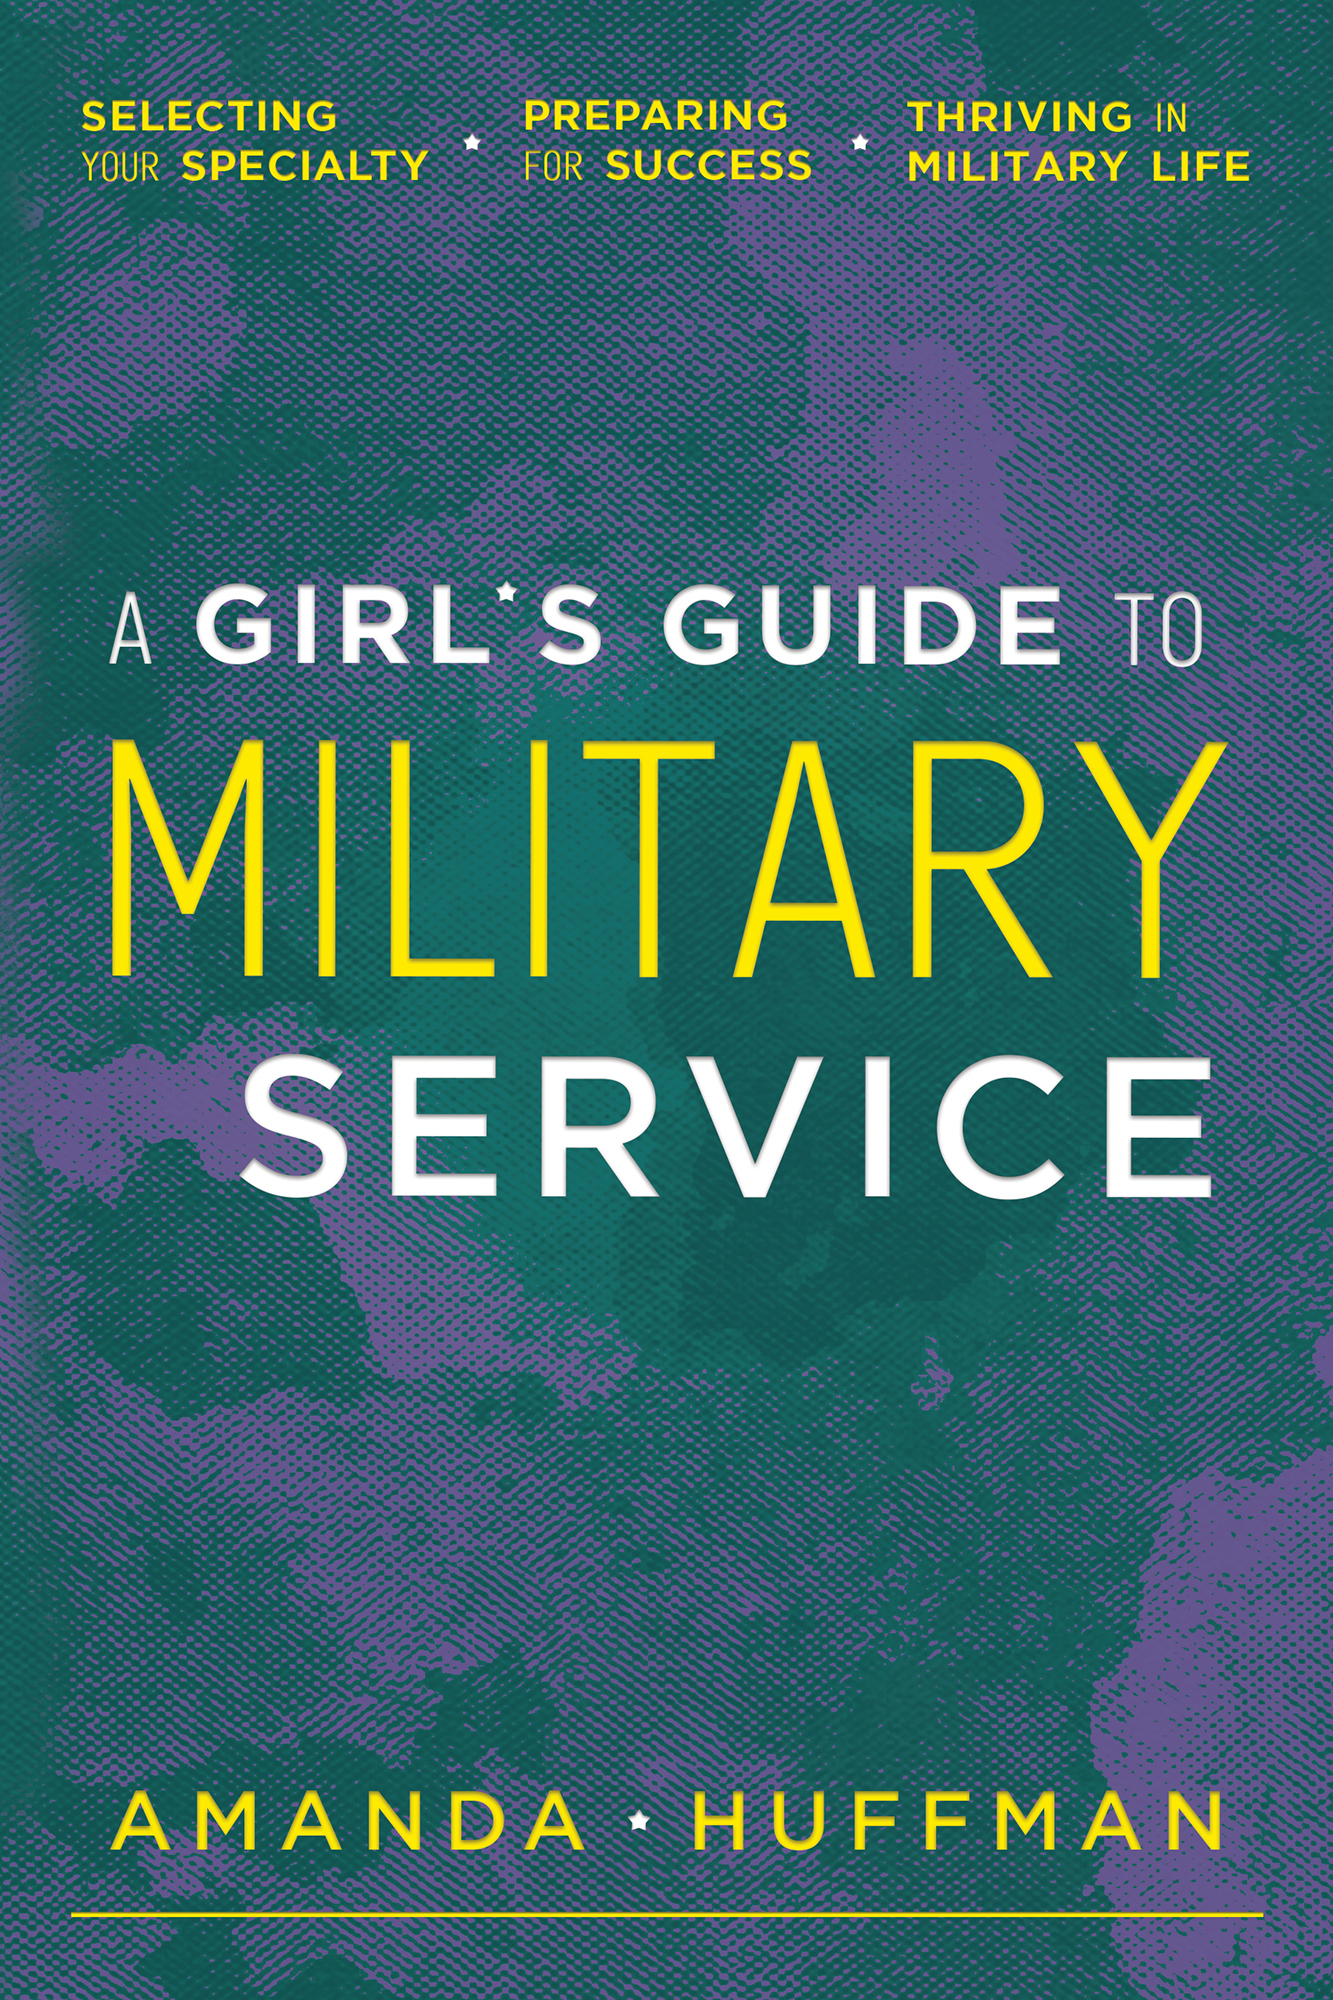 A Girl's Guide to Military Service by Amanda Huffman, published by Elva Resa